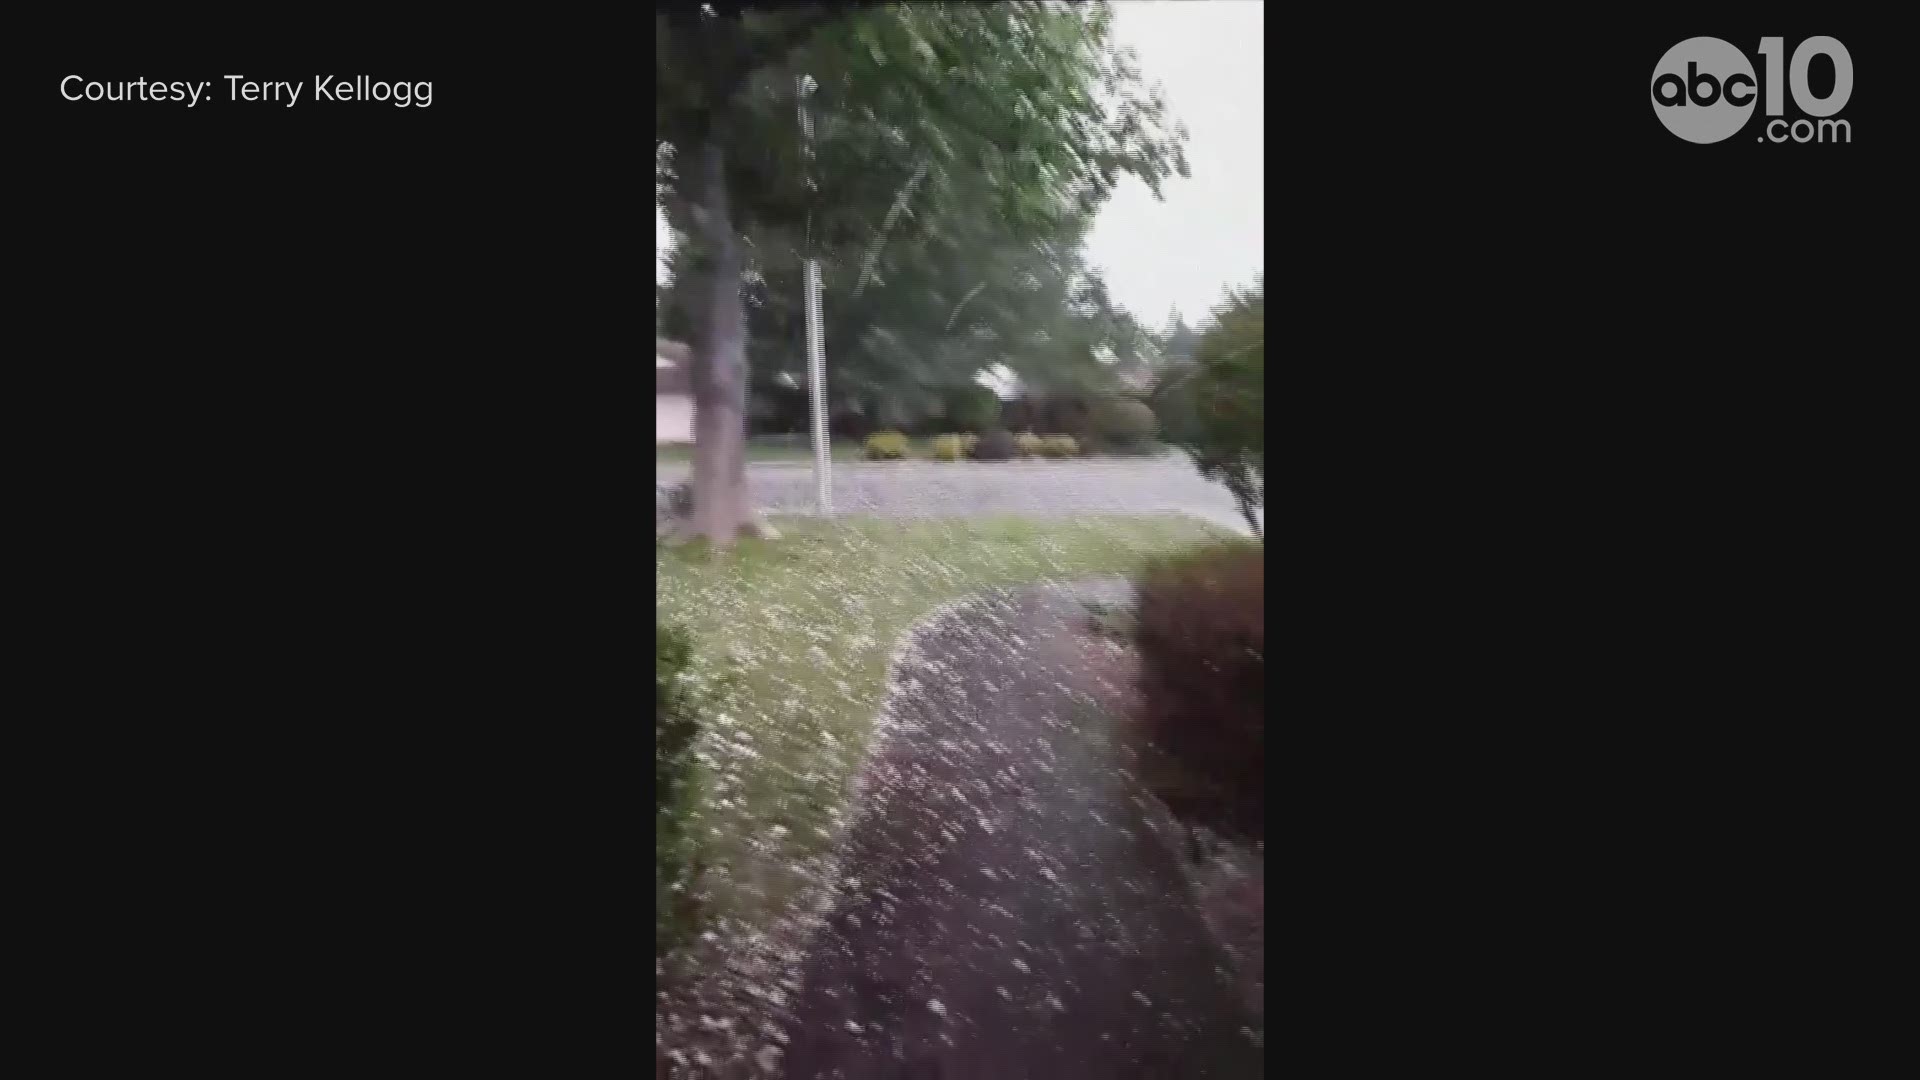 On Friday, a thunderstorm appeared over Redding and dropped "golf ball sized hail" onto the city